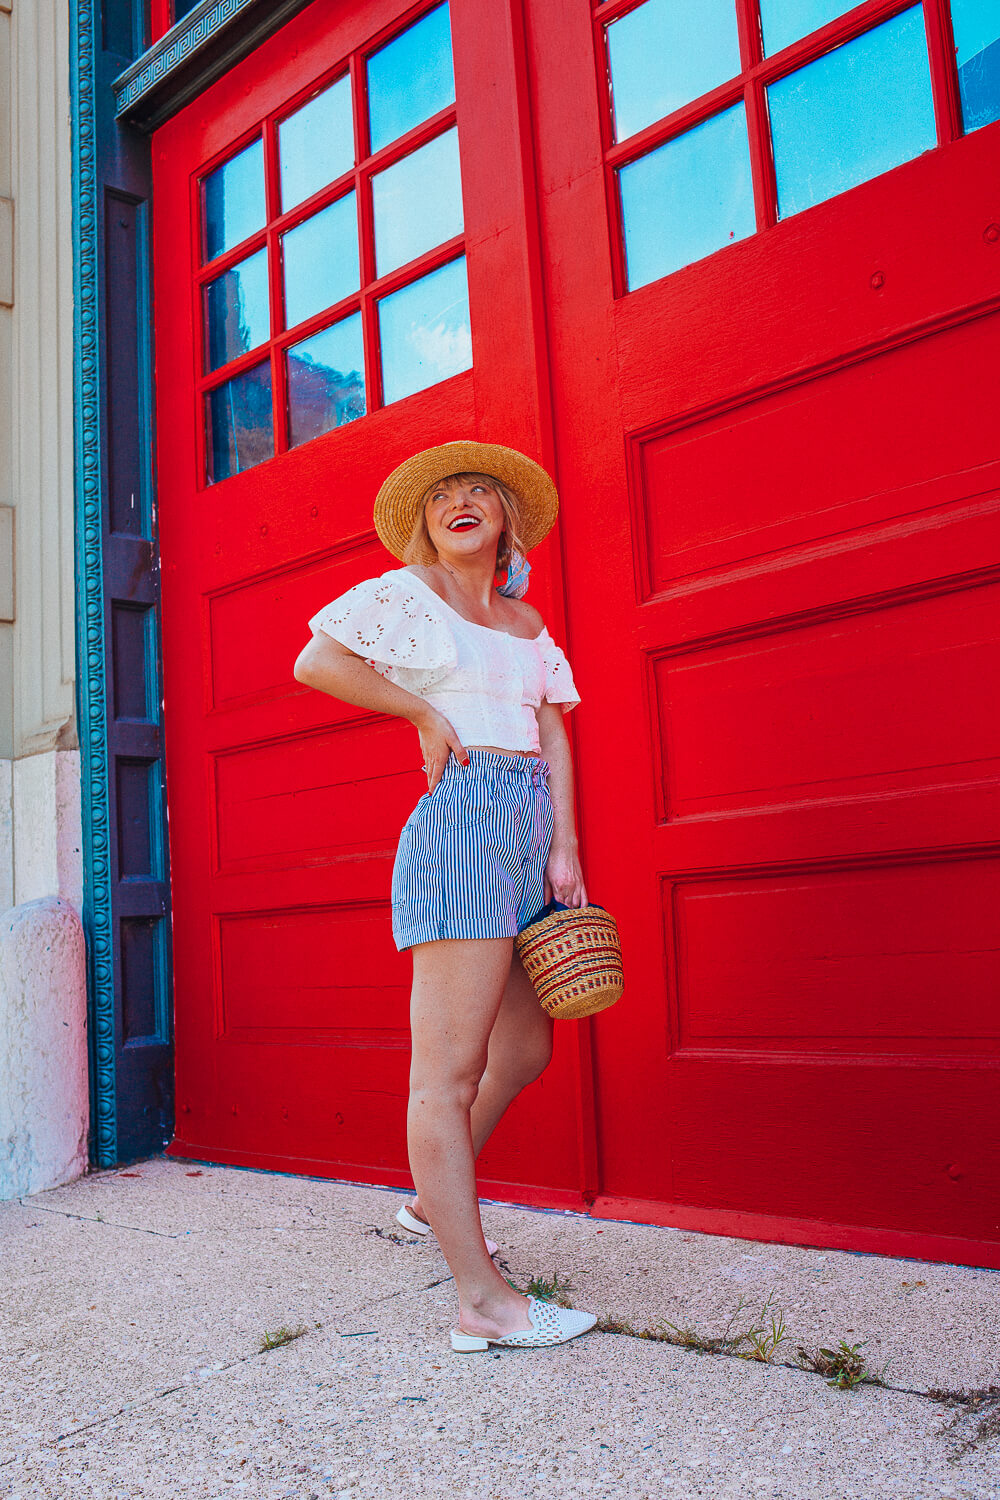 Outfit inspo for the Fourth of July 2019 - chic inspiration to celebrate in!